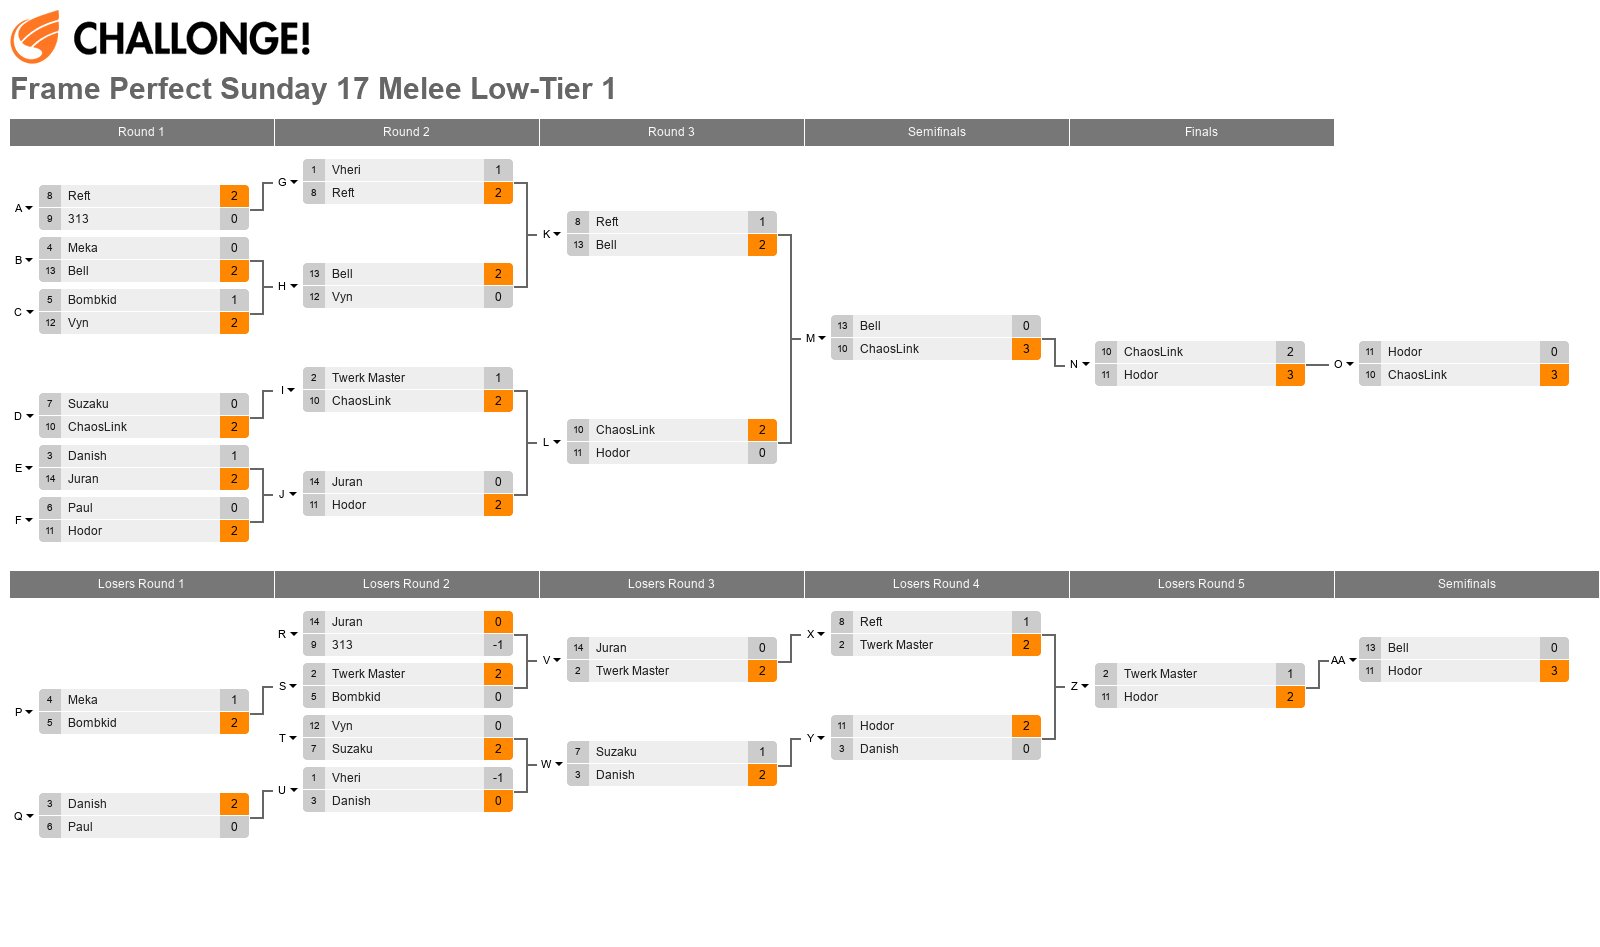 Frame Perfect Sunday 17 Melee Low-Tier 1